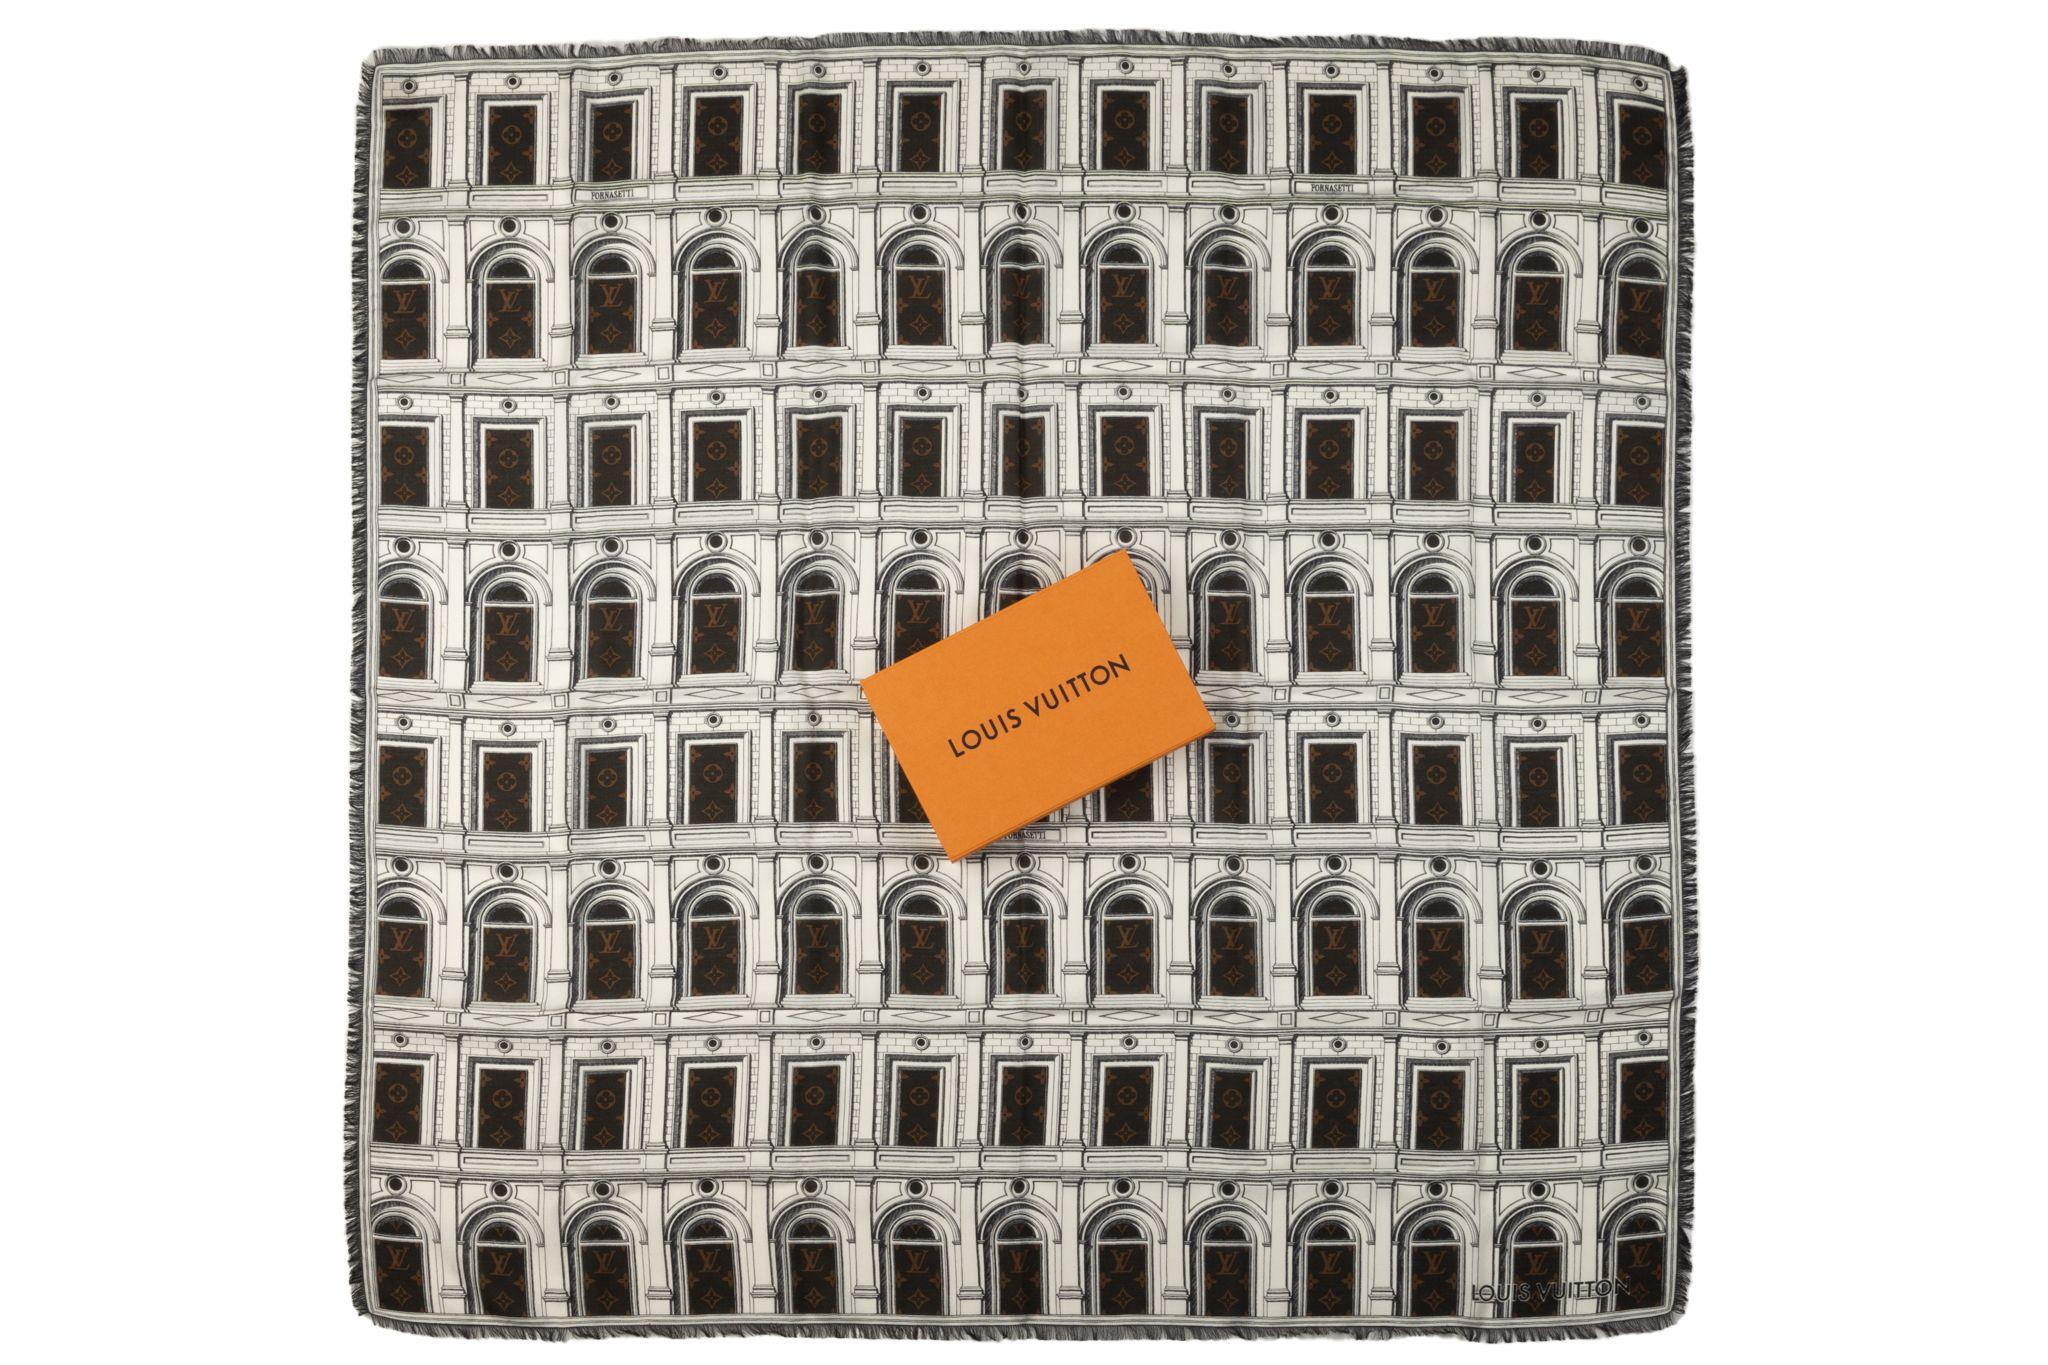 This is an authentic LOUIS VUITTON X FORNASETTI Wool Silk Architettura Shawl in Brown. This stylish large shawl is finely crafted of 61% wool and 39% silk. This shawl features an intricate building illustration from the archives of the artistic